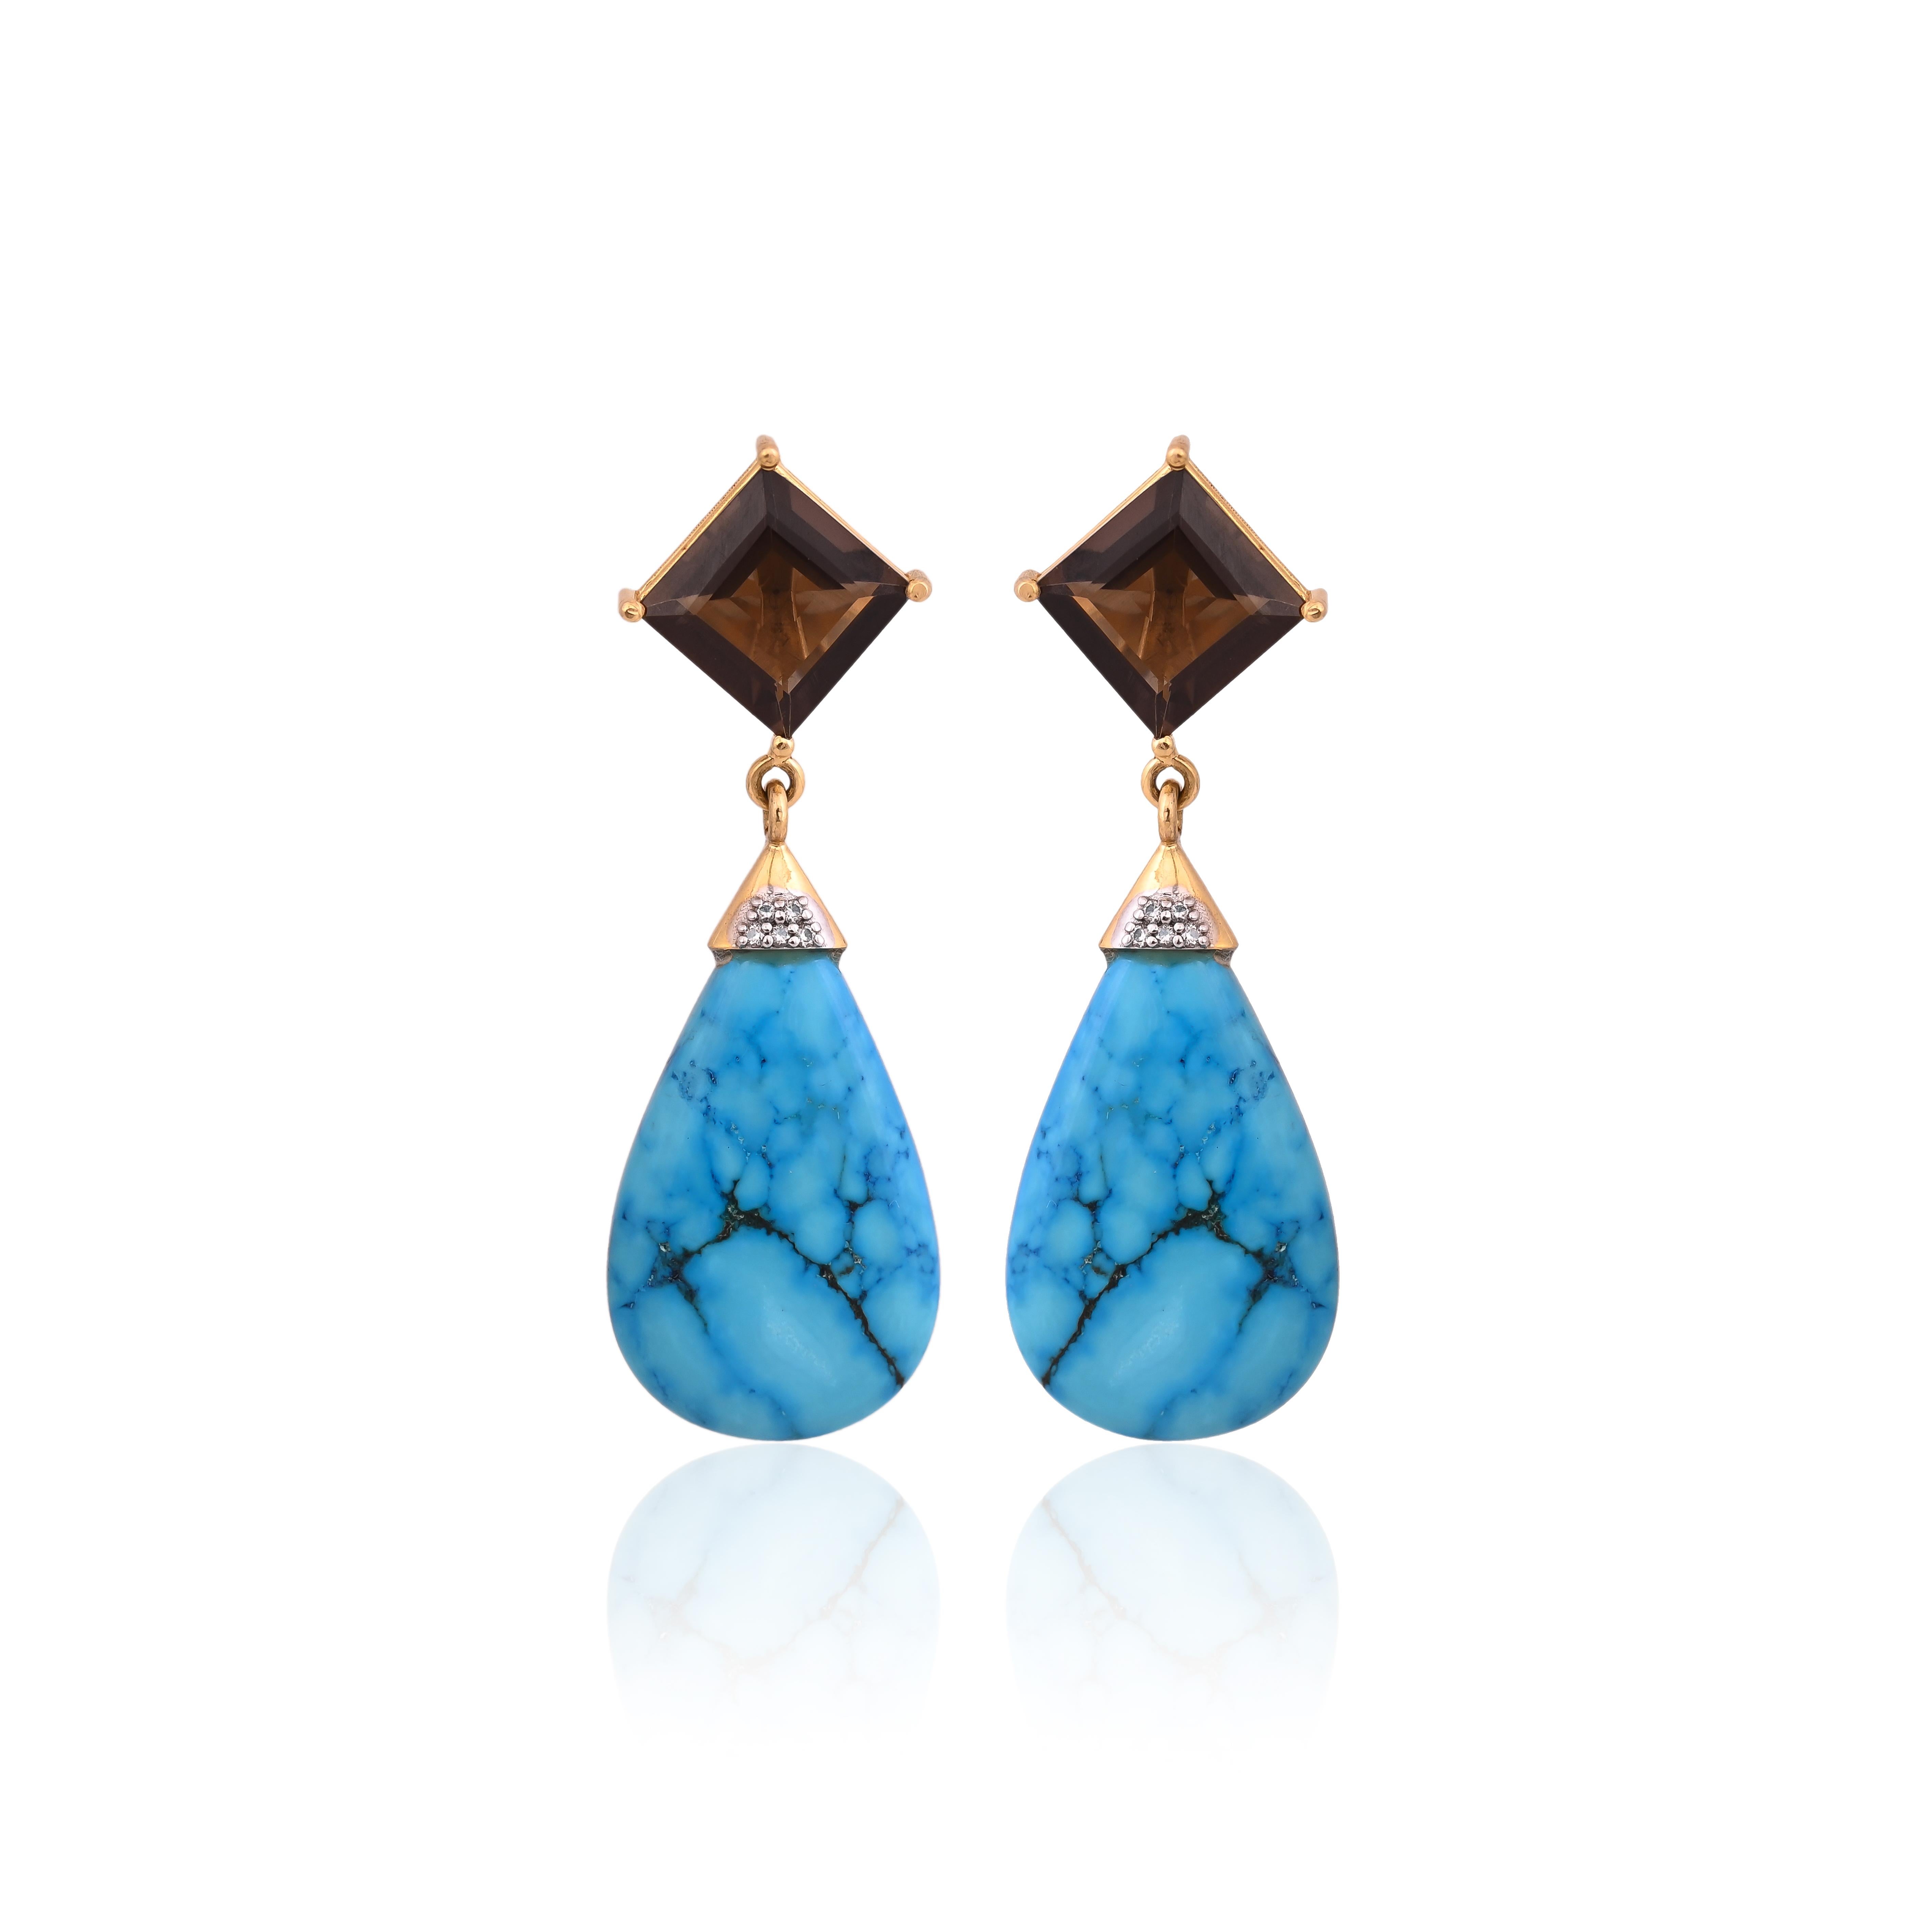 A very gorgeous and beautiful, Smokey Quartz & Turquoise Drop Earrings set in 18K Yellow Gold & Diamonds. The weight of the Smokey Quartz is 7.44 carats. The weight of the Turquoise is 25.70 carats. The Diamonds weight is 0.06 carats. Net 18K Gold